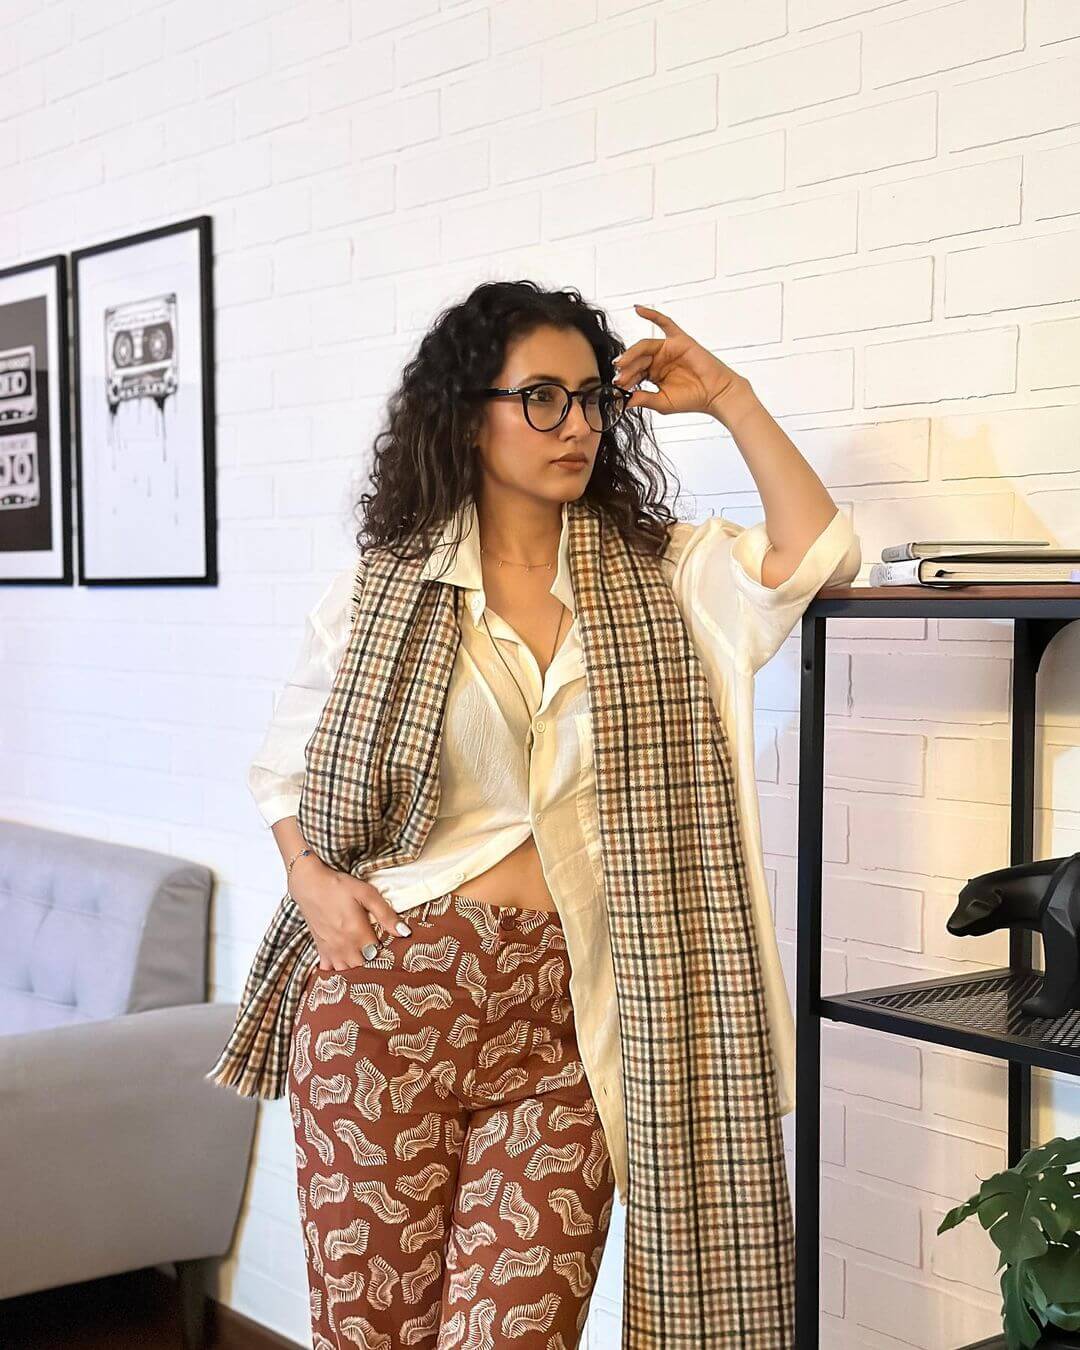 Additi Gupta Geek Girl Look In  Comfy Over-Sized Shirt With Pants & Glasses